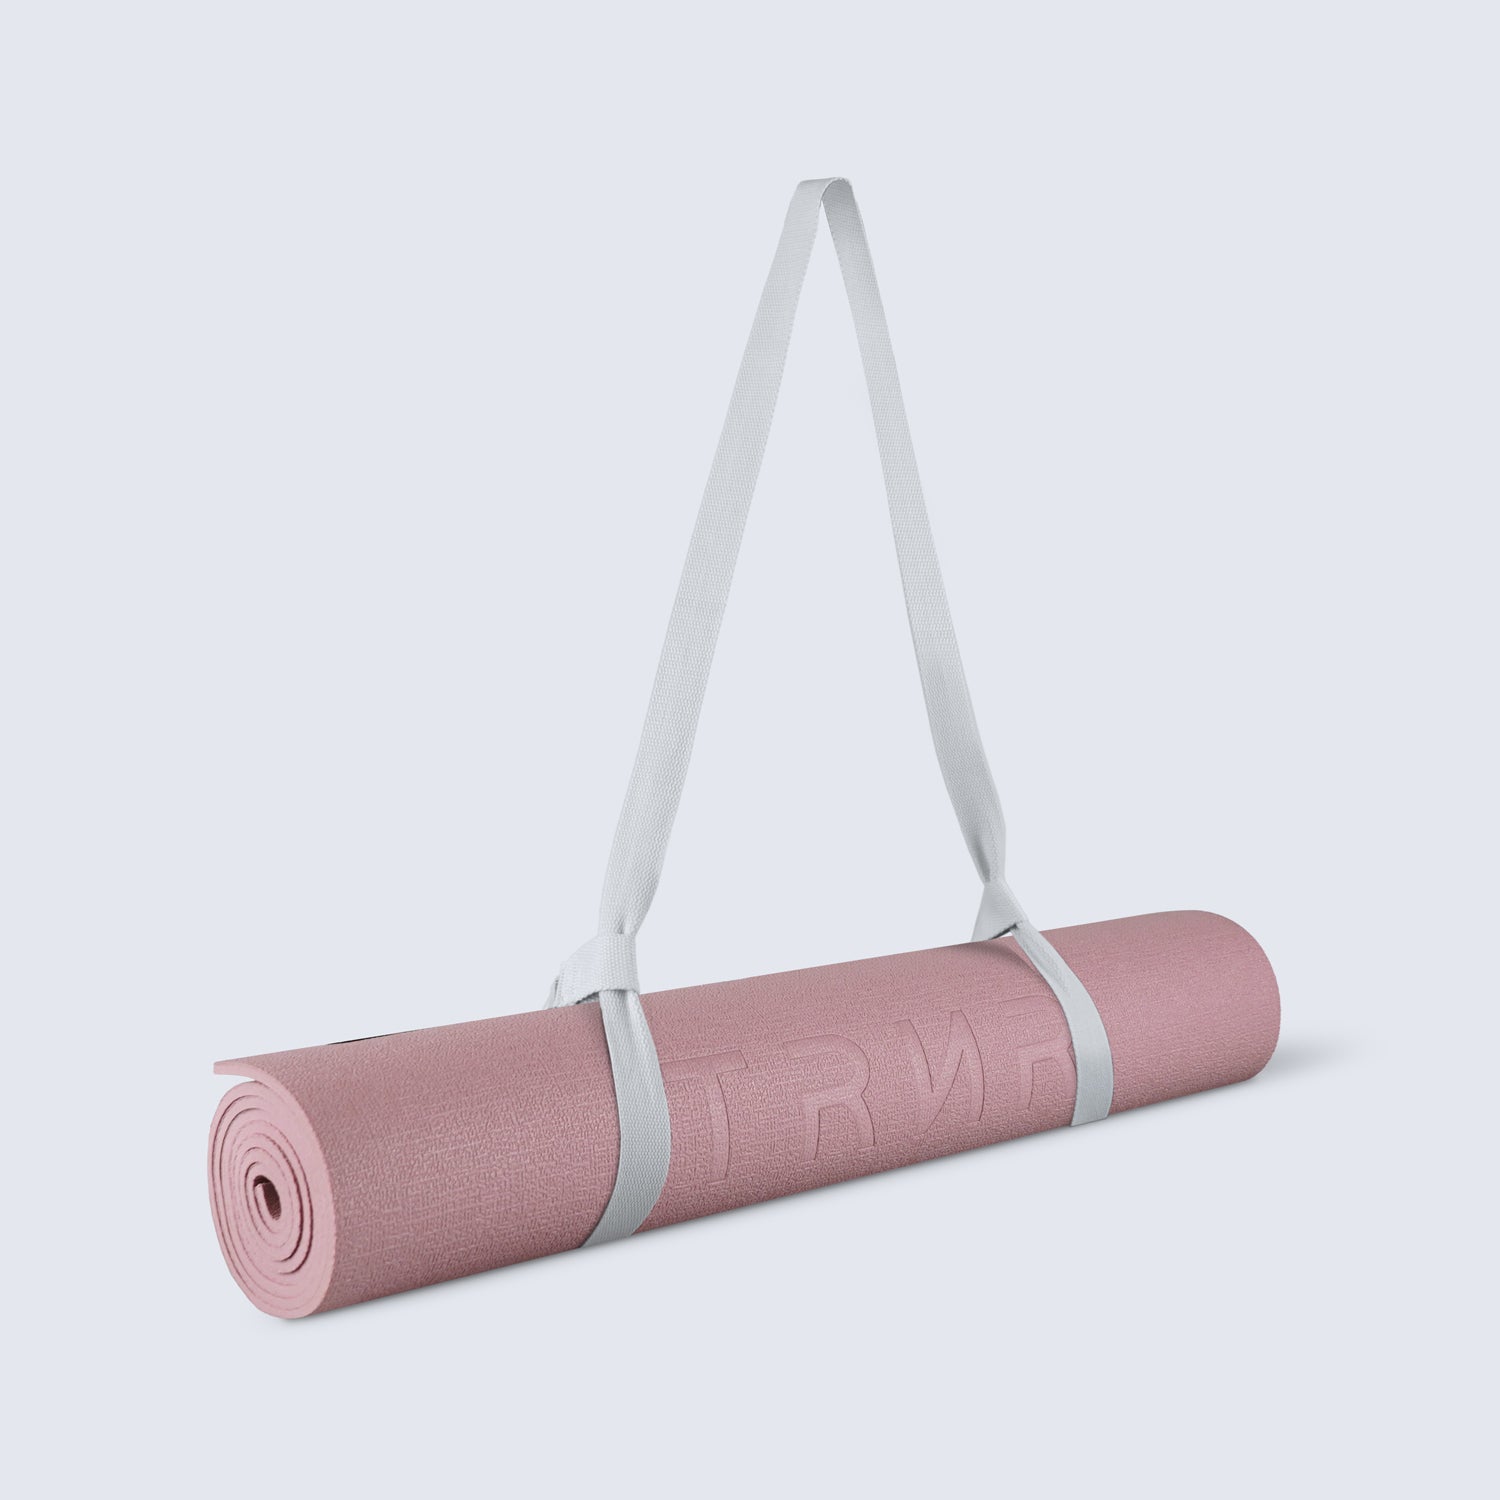 Rolled-up Neo Mat in Rose Colour and 6 mm Thickness | Featuring Light Grey Carry Strap